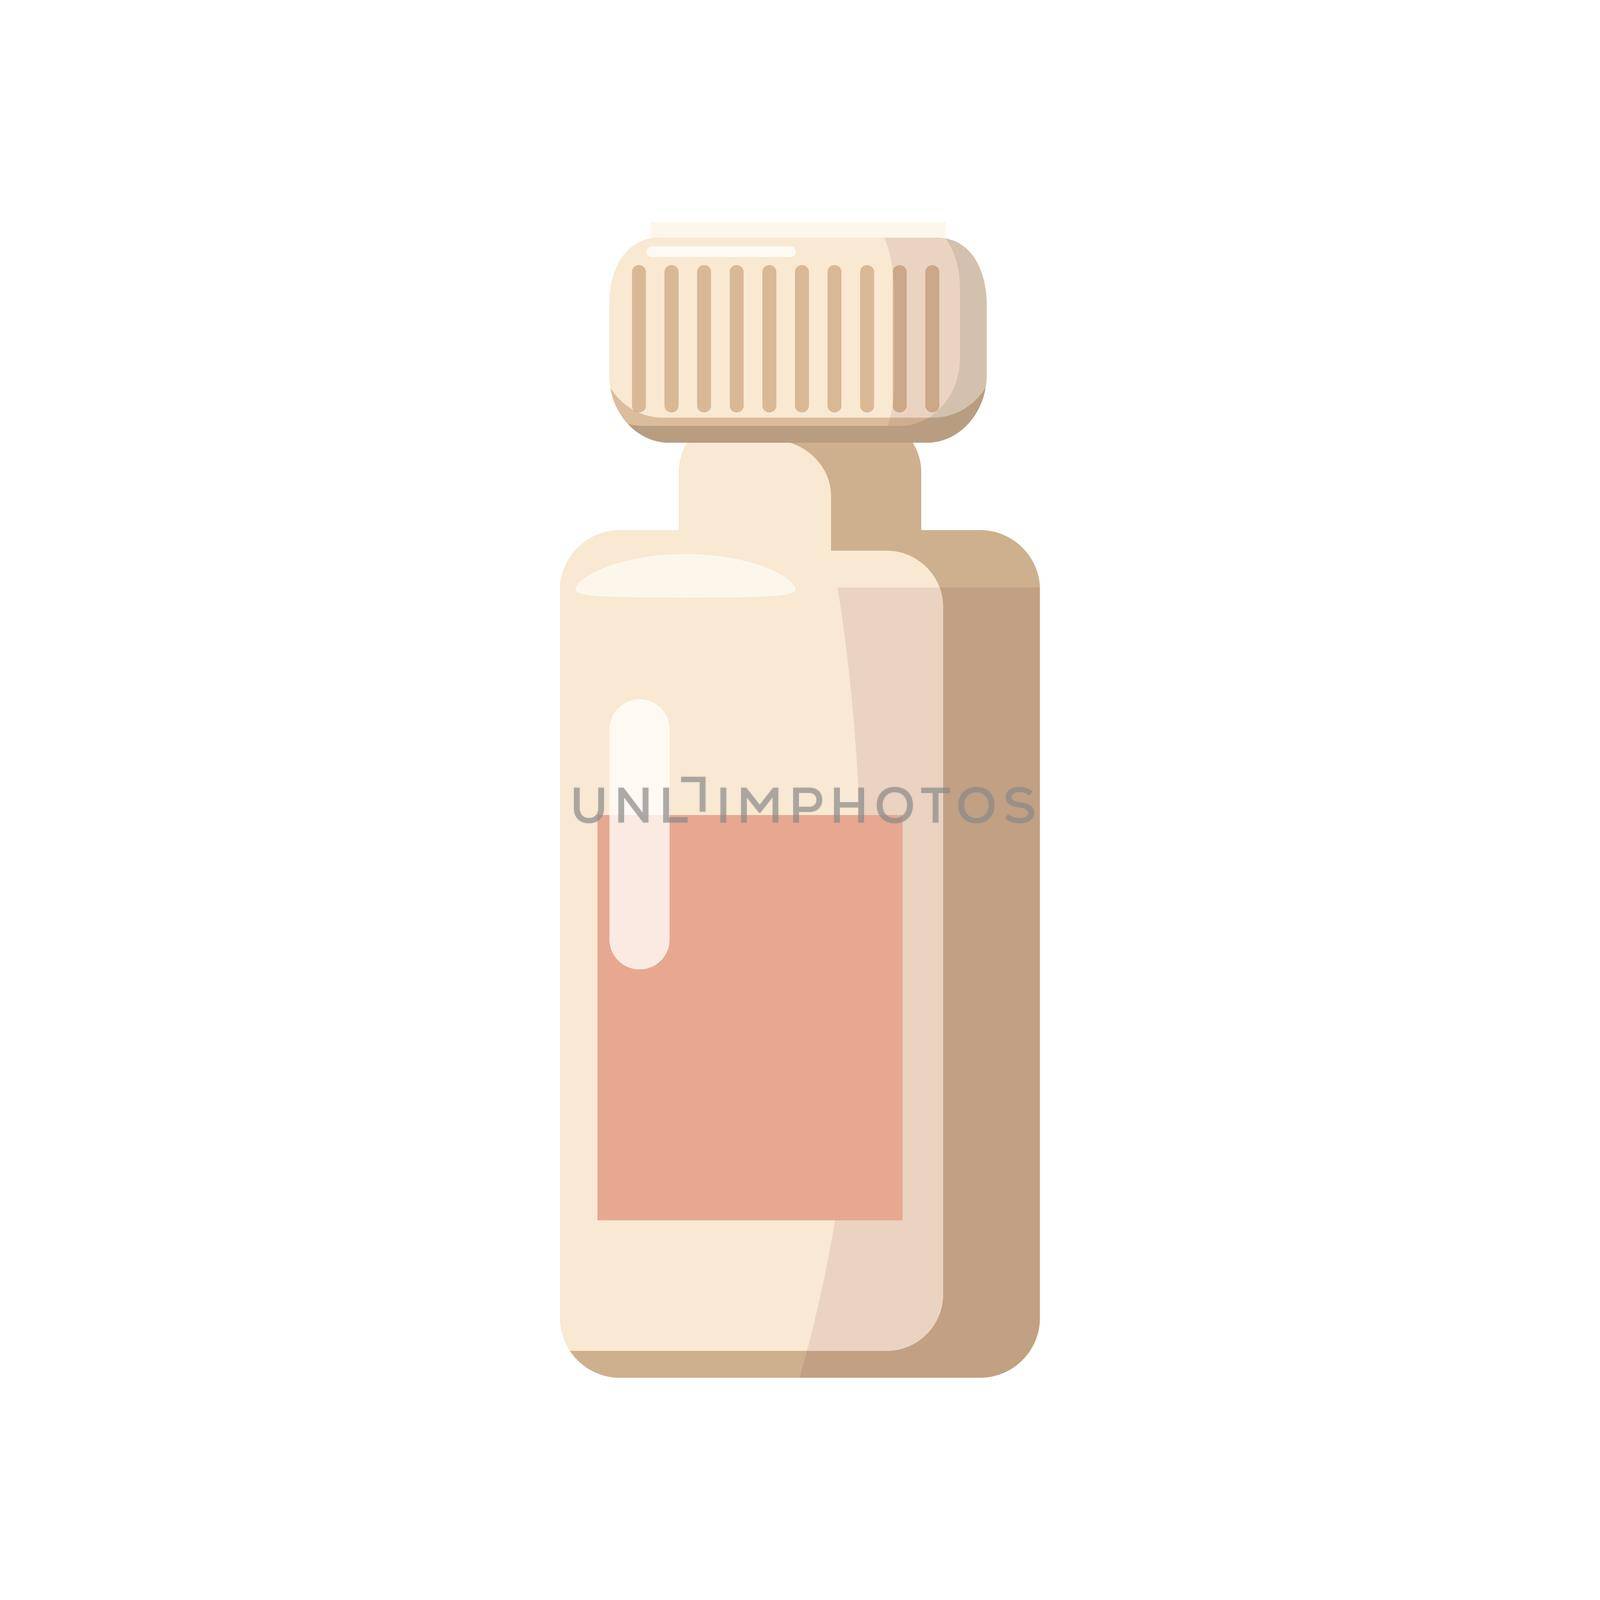 Medicine bottle icon in cartoon style on a white background